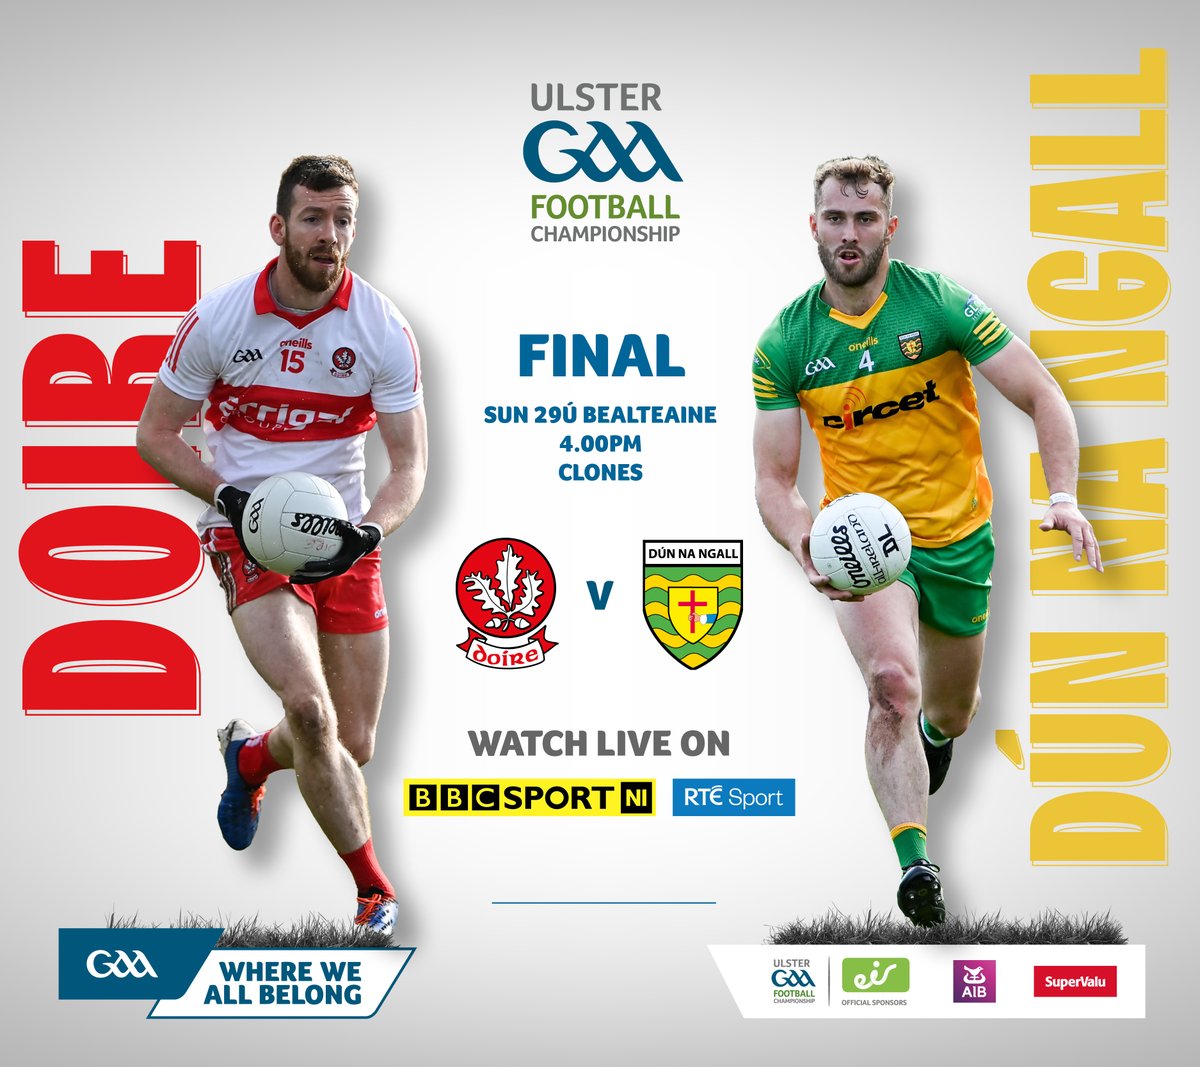 test Twitter Media - 5⃣ days to go!

2022 Ulster Senior Football Championship Final🏆

@Doiregaa 🟥⬜️ vs @officialdonegal 🟨🟩
Sunday 29th May 4pm
Clones

#Ulster2022 https://t.co/XLDfmlW0xD